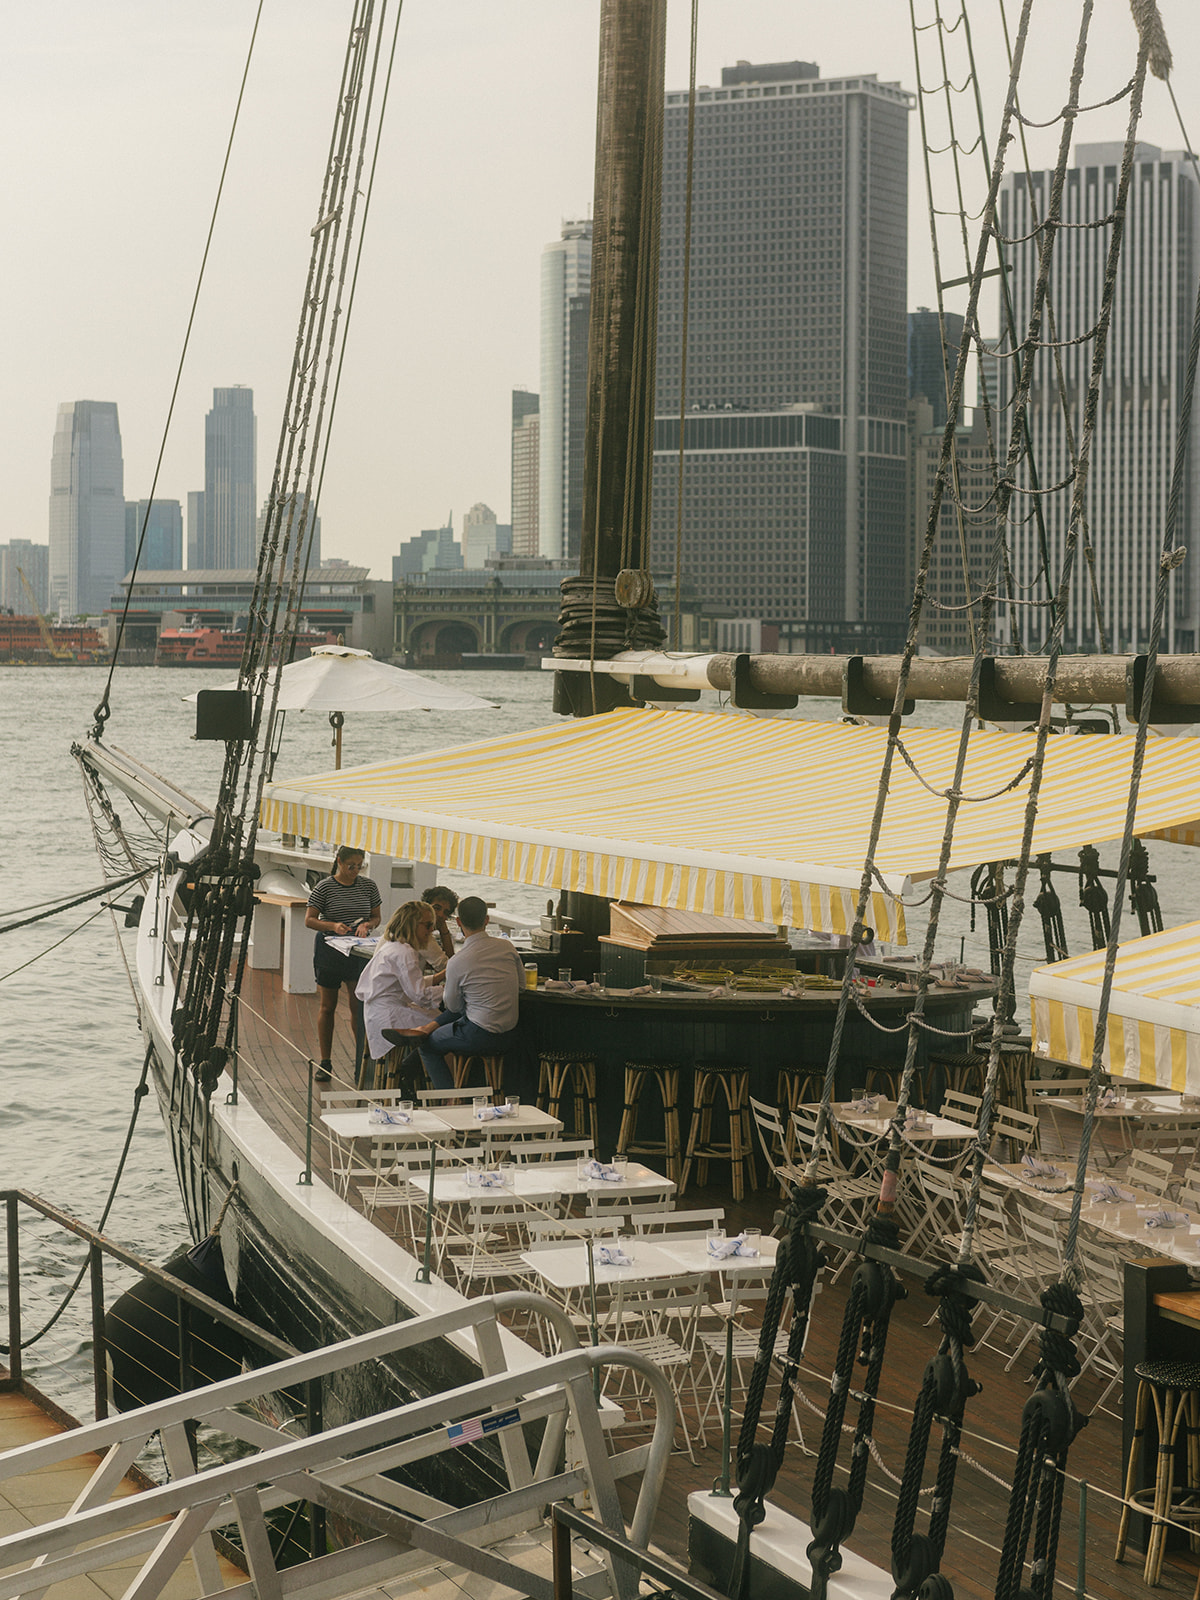 Discover the allure of Pilot Brooklyn! Join us for a venue tour of the 1924 Schooner ship docked at Pier 6. 